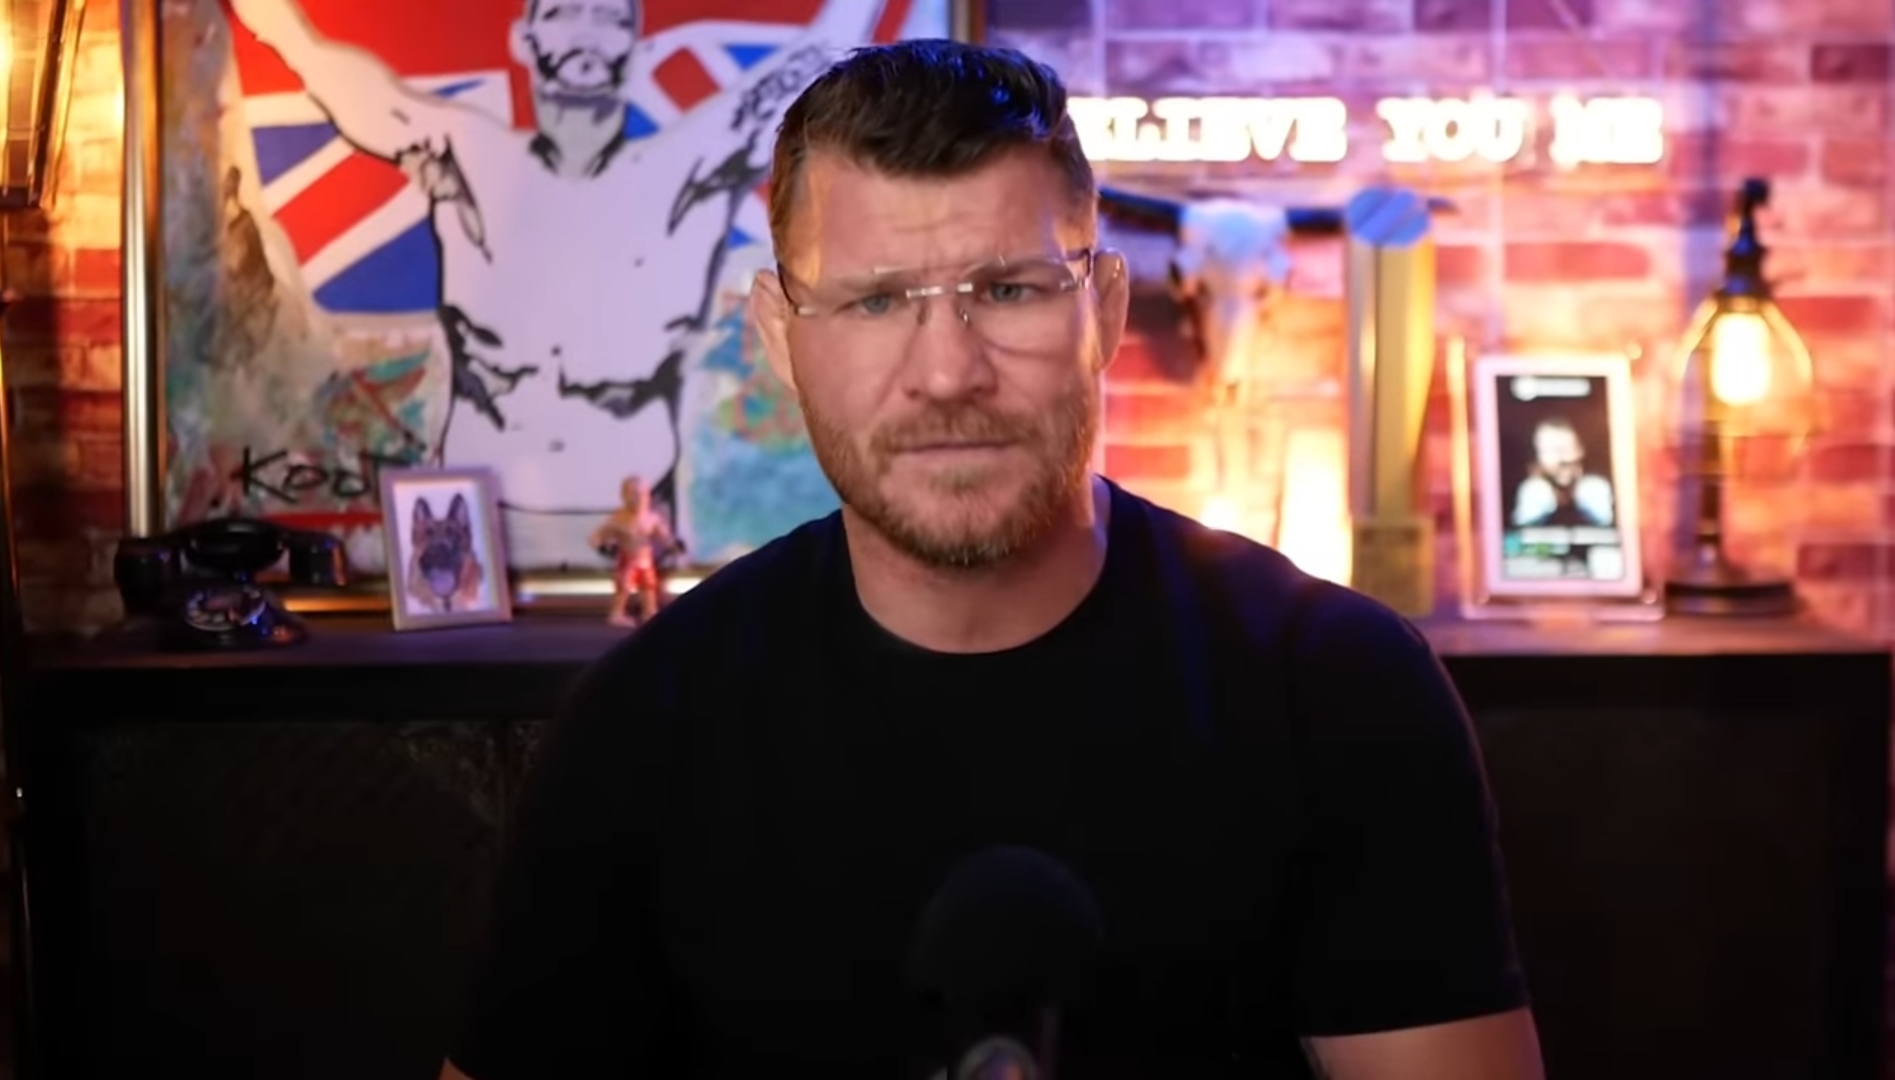 A still from Michael Bisping's podcast